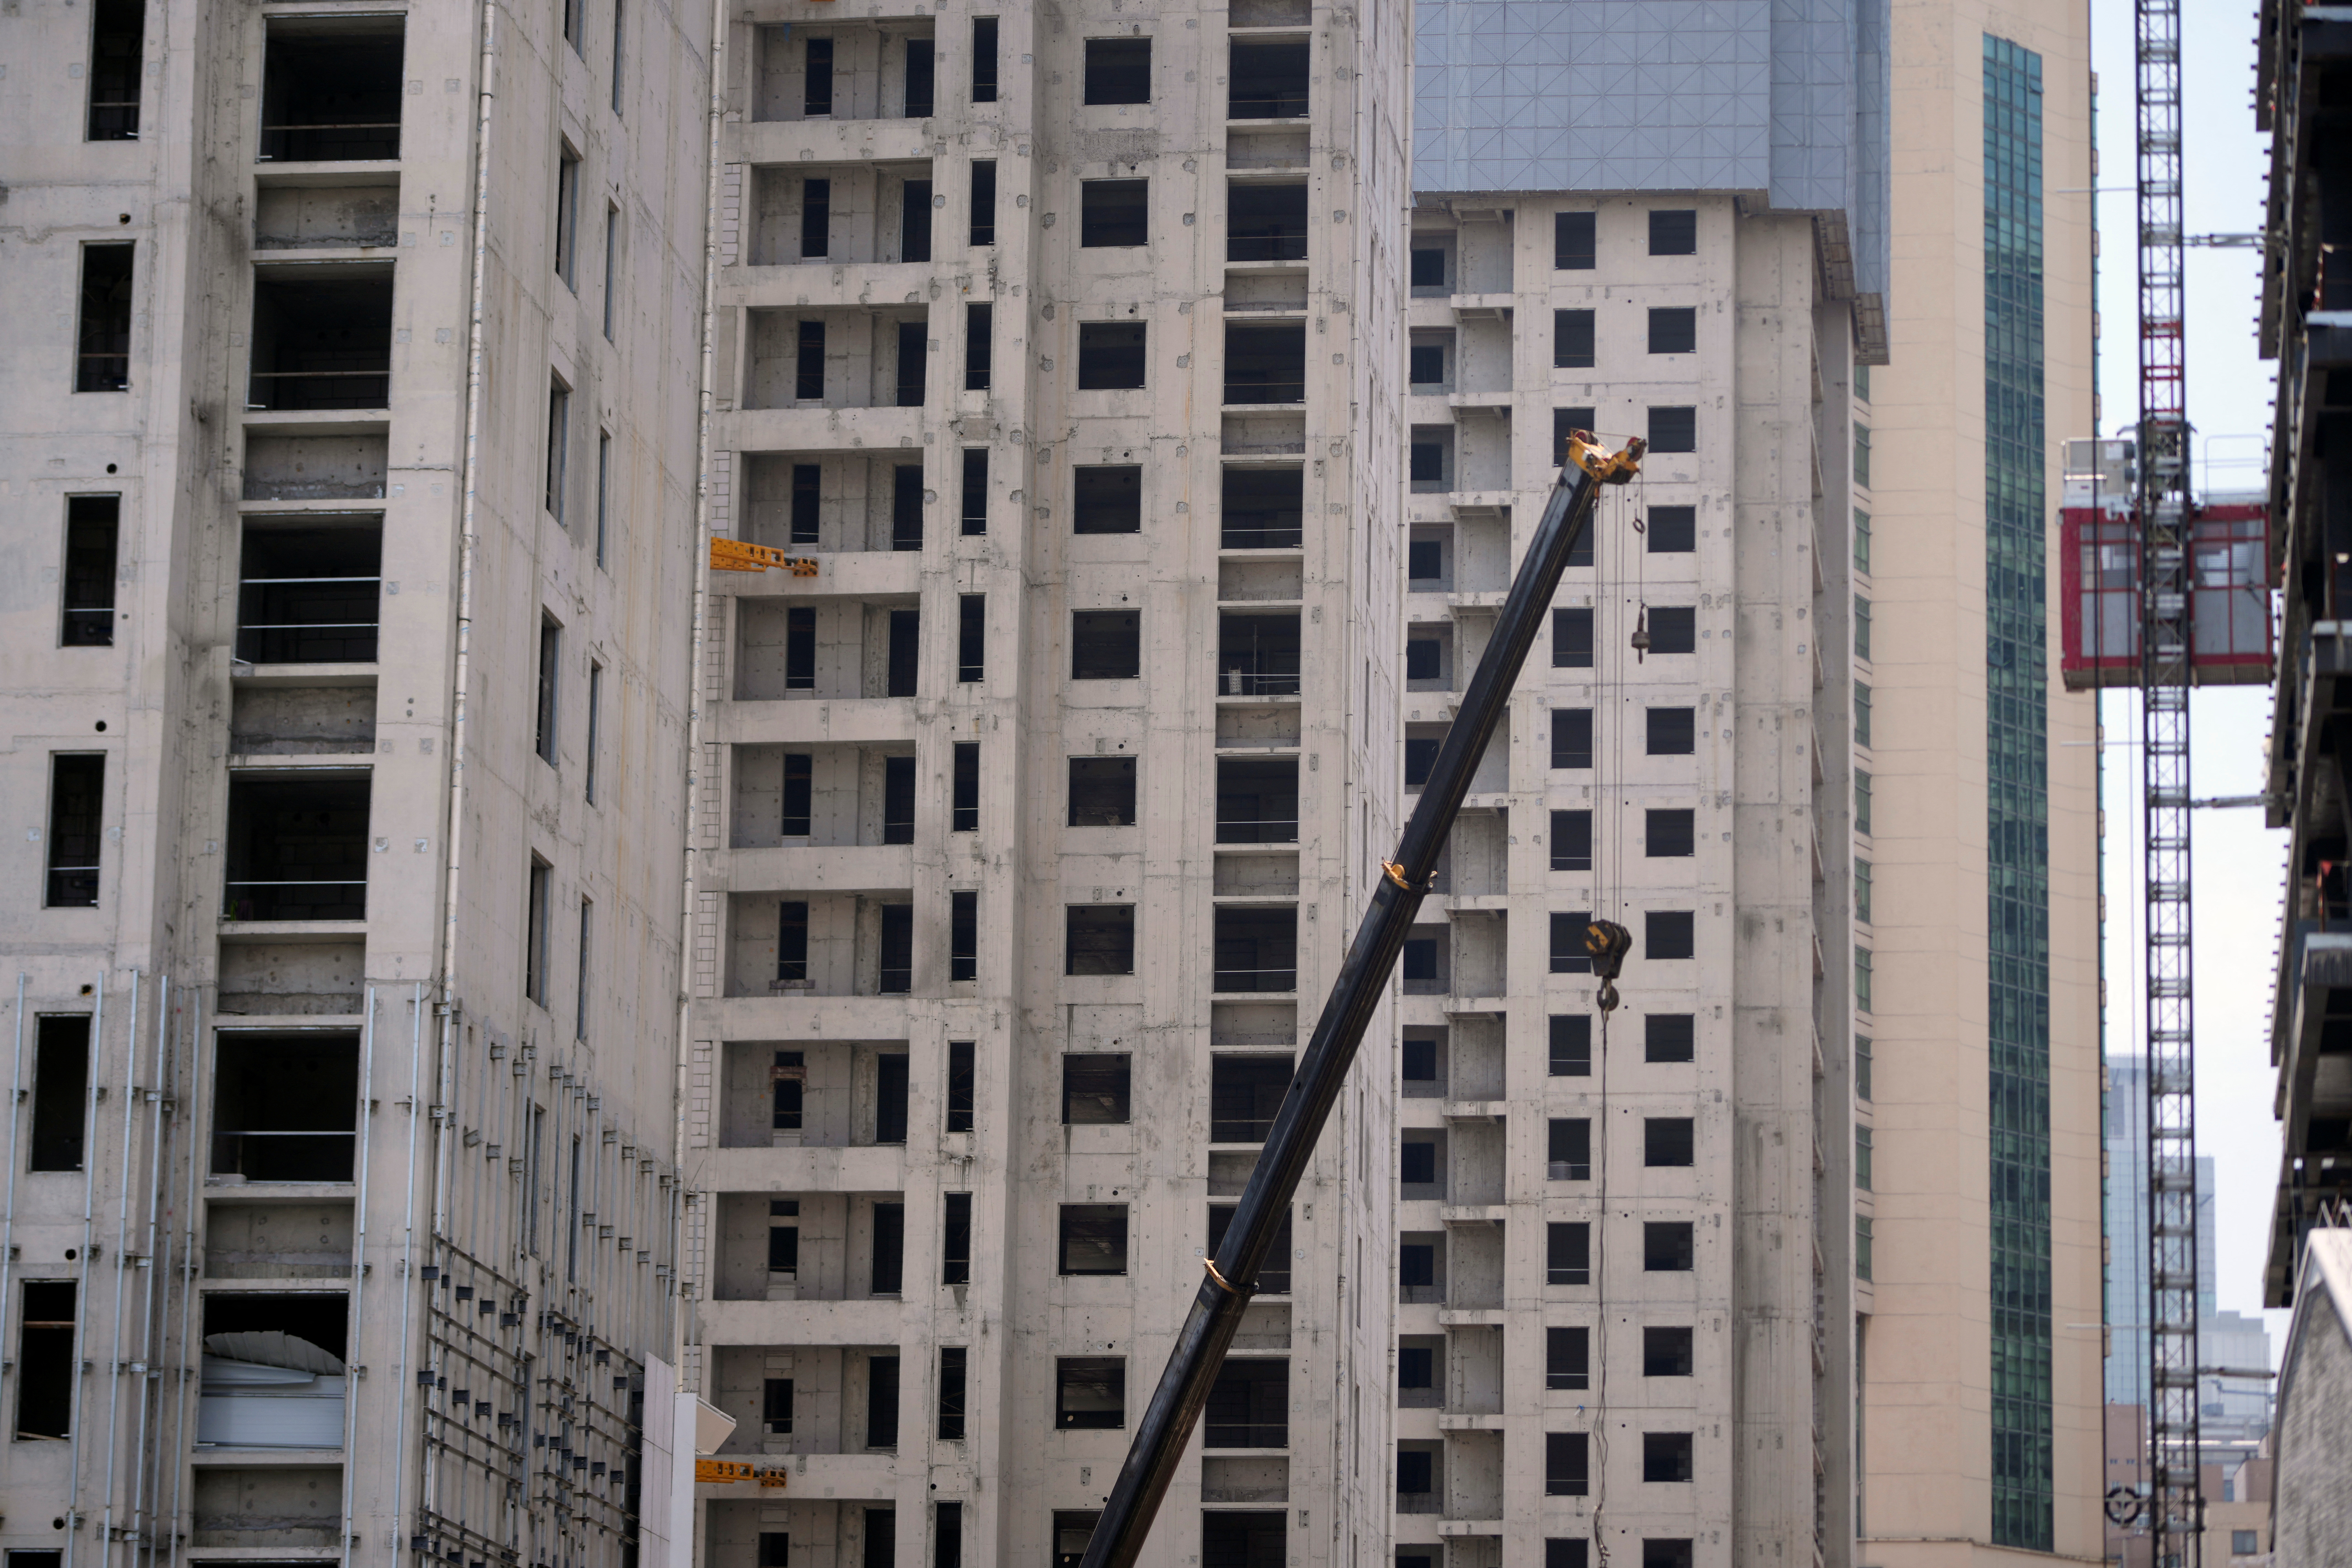 Residential buildings under construction in Shanghai, China